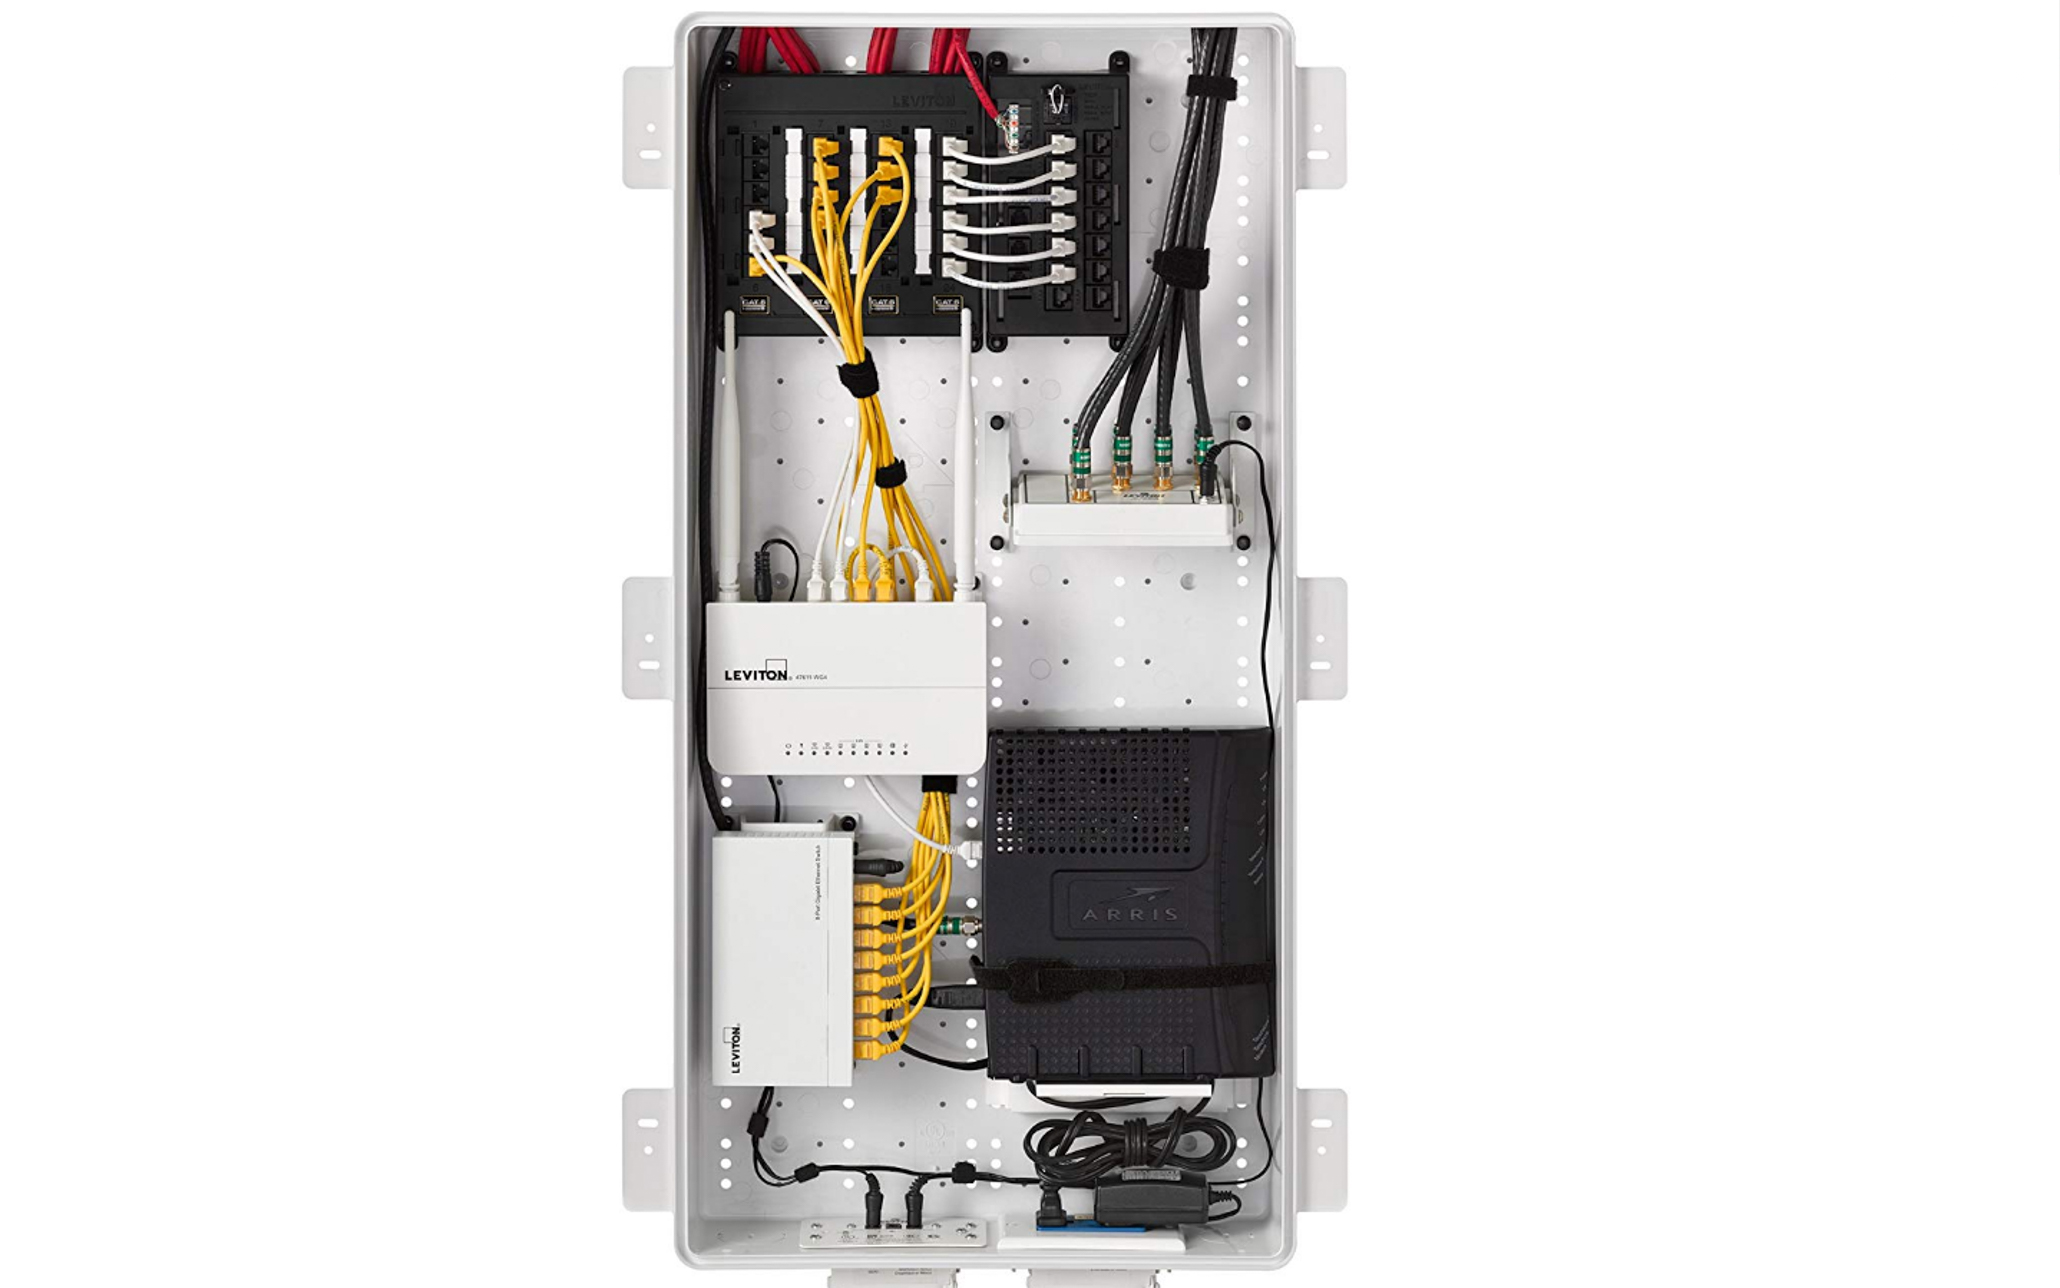 The Leviton 49605 structured media enclosure, populated with a common networking components. Image: Leviton.